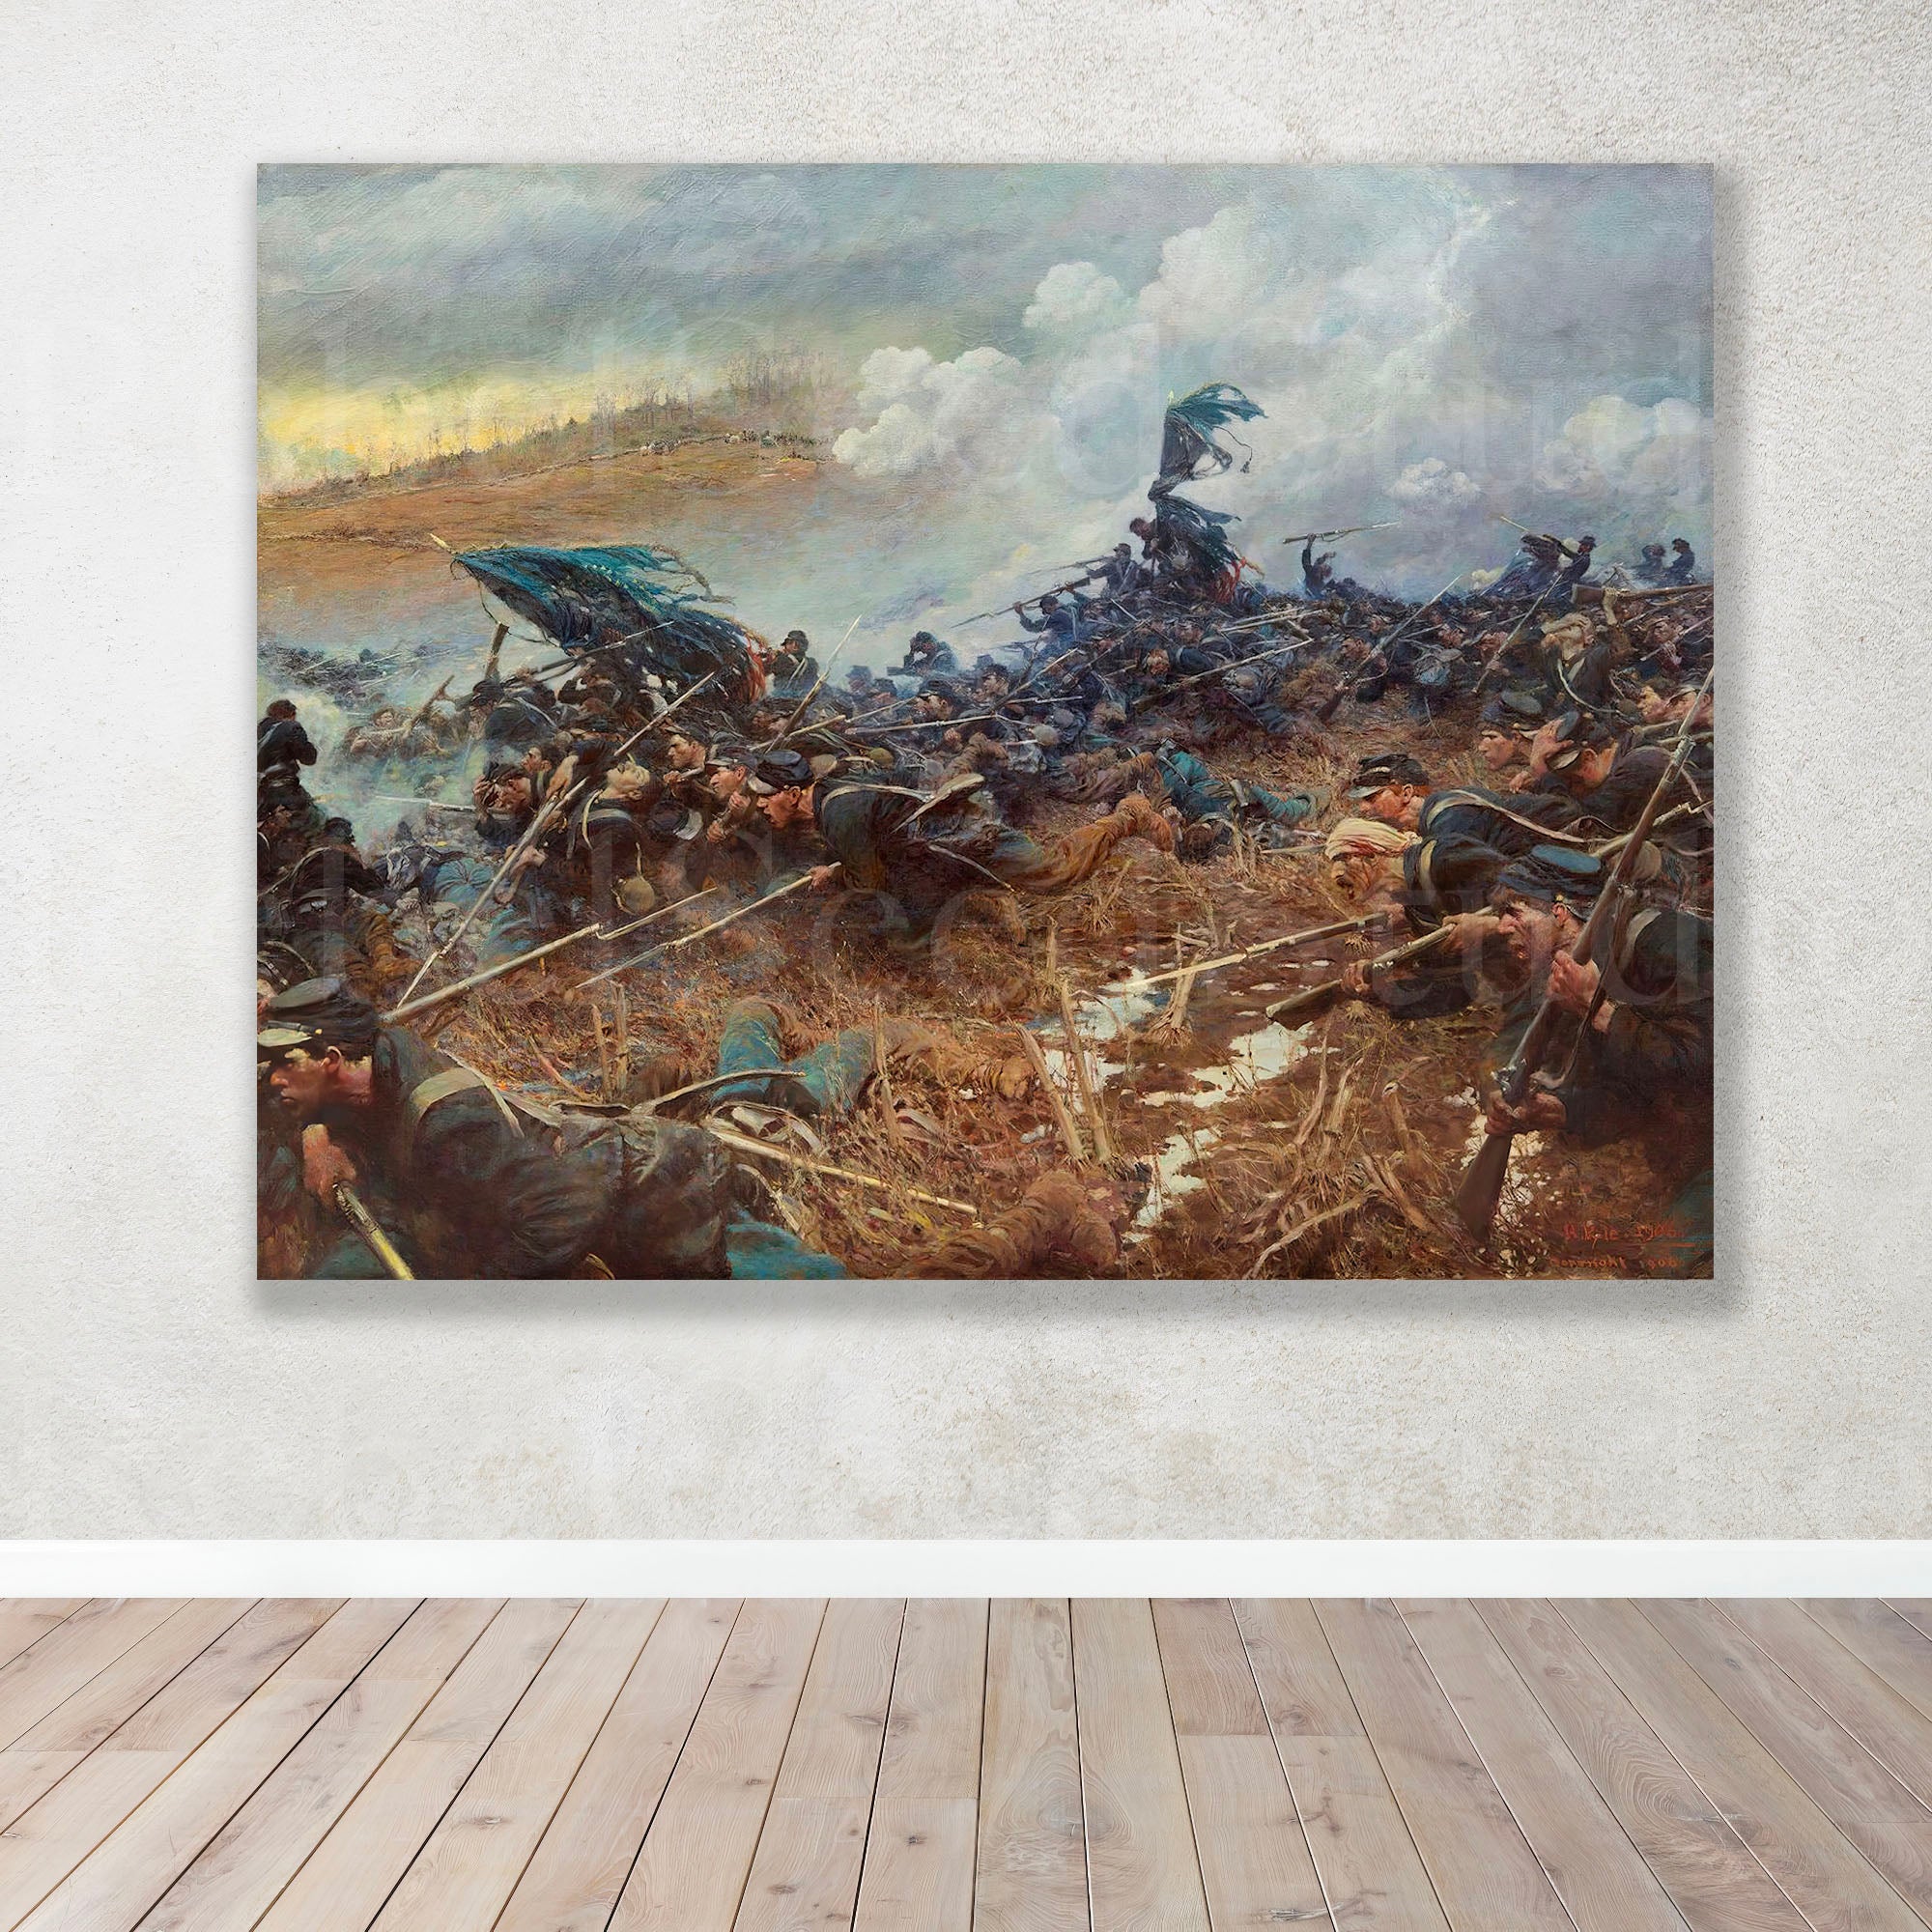 The Battle of Nashville - Wall Art (Metal Print, Archival Print, or Poster Print)